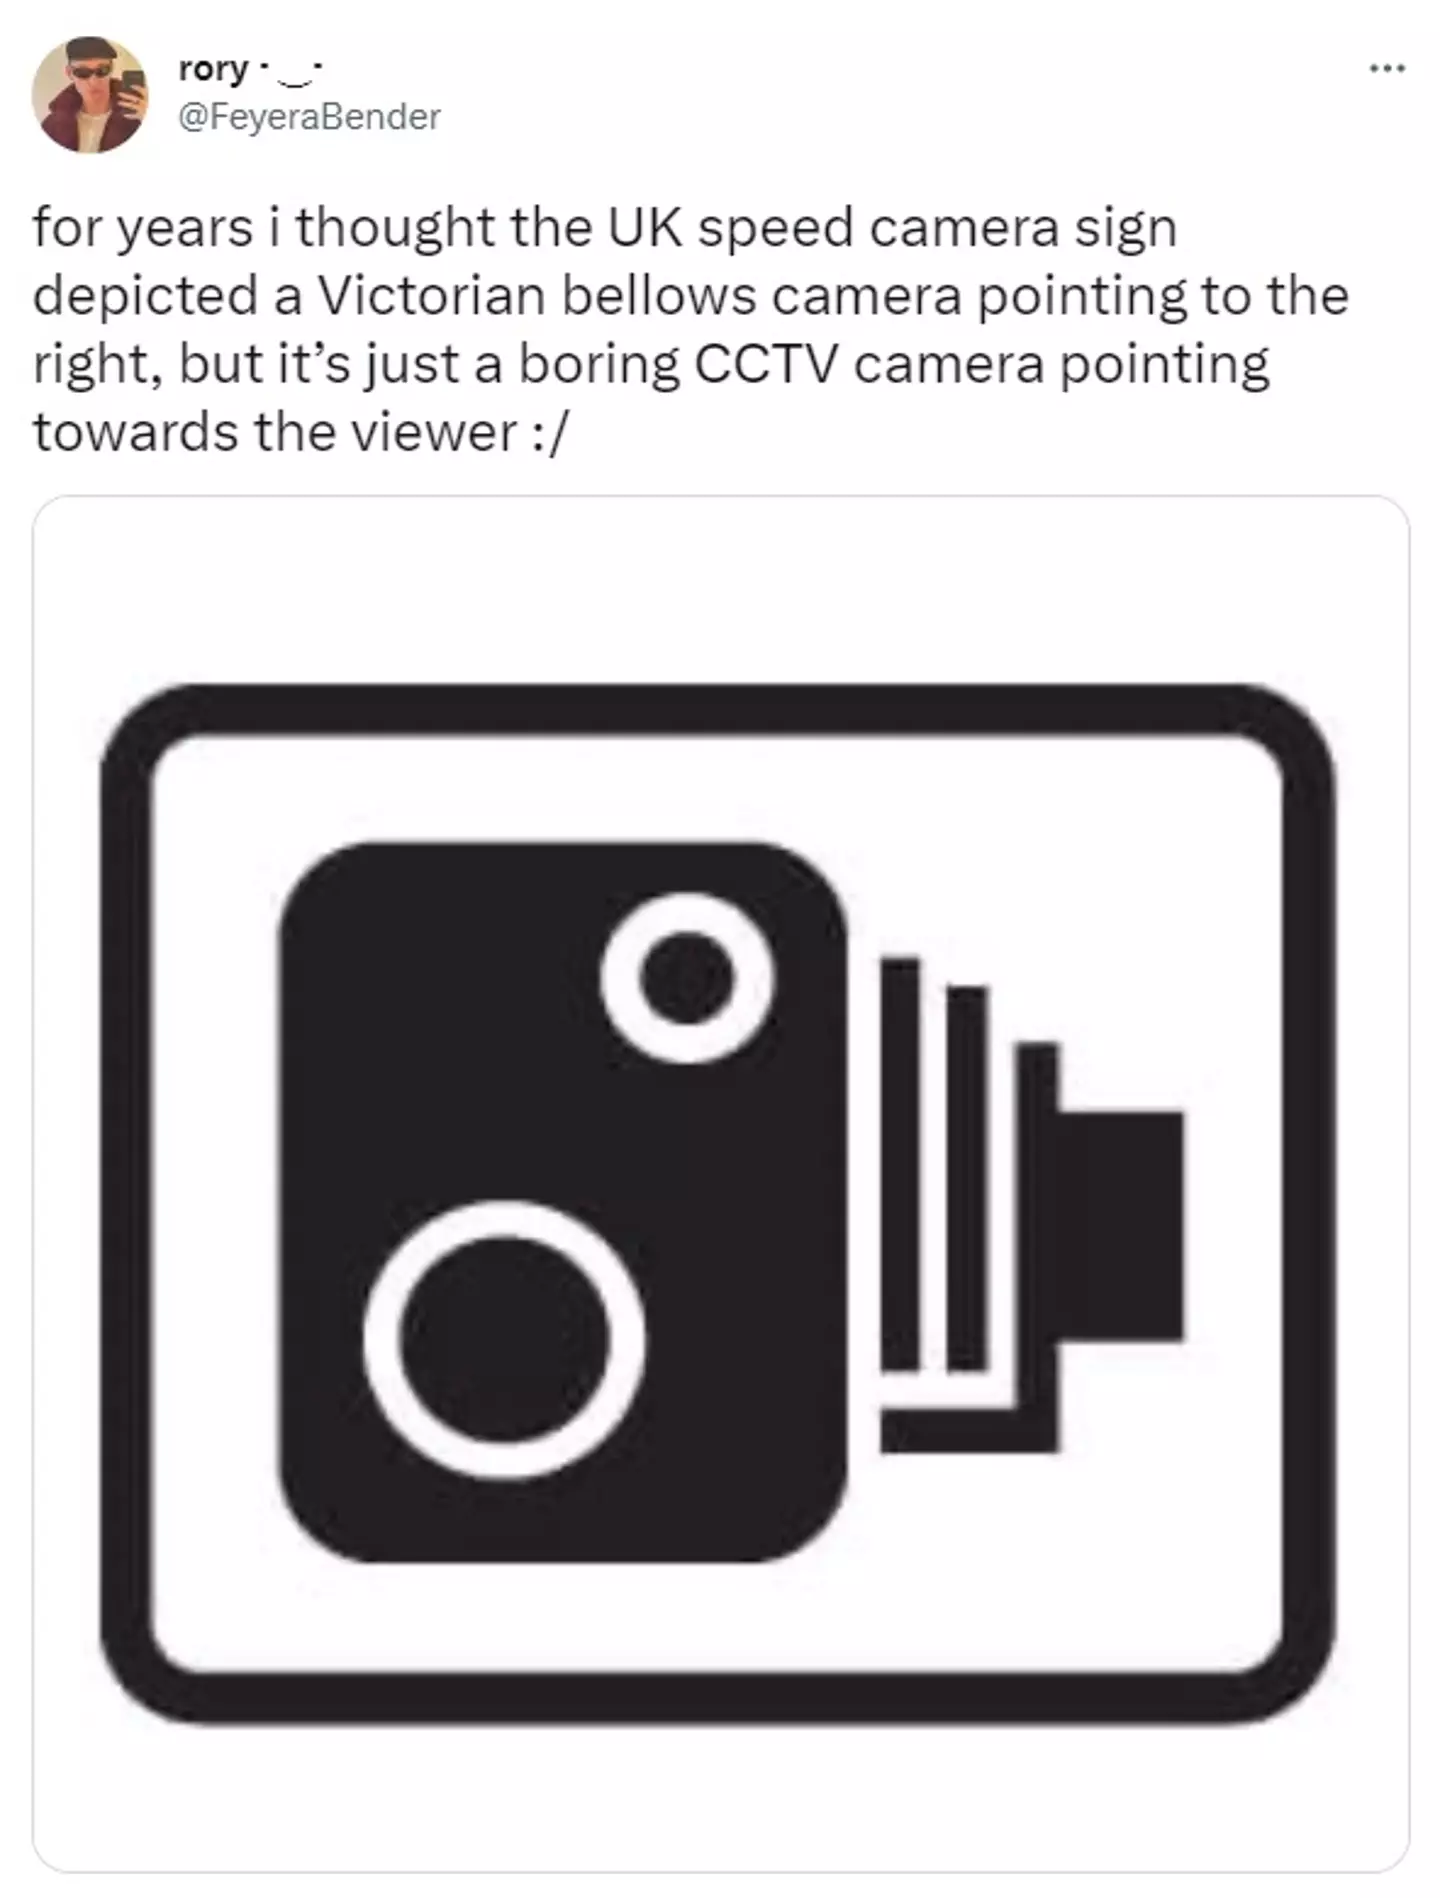 It turns out that we've been looking at the speed camera sign we all know and dread wrong.